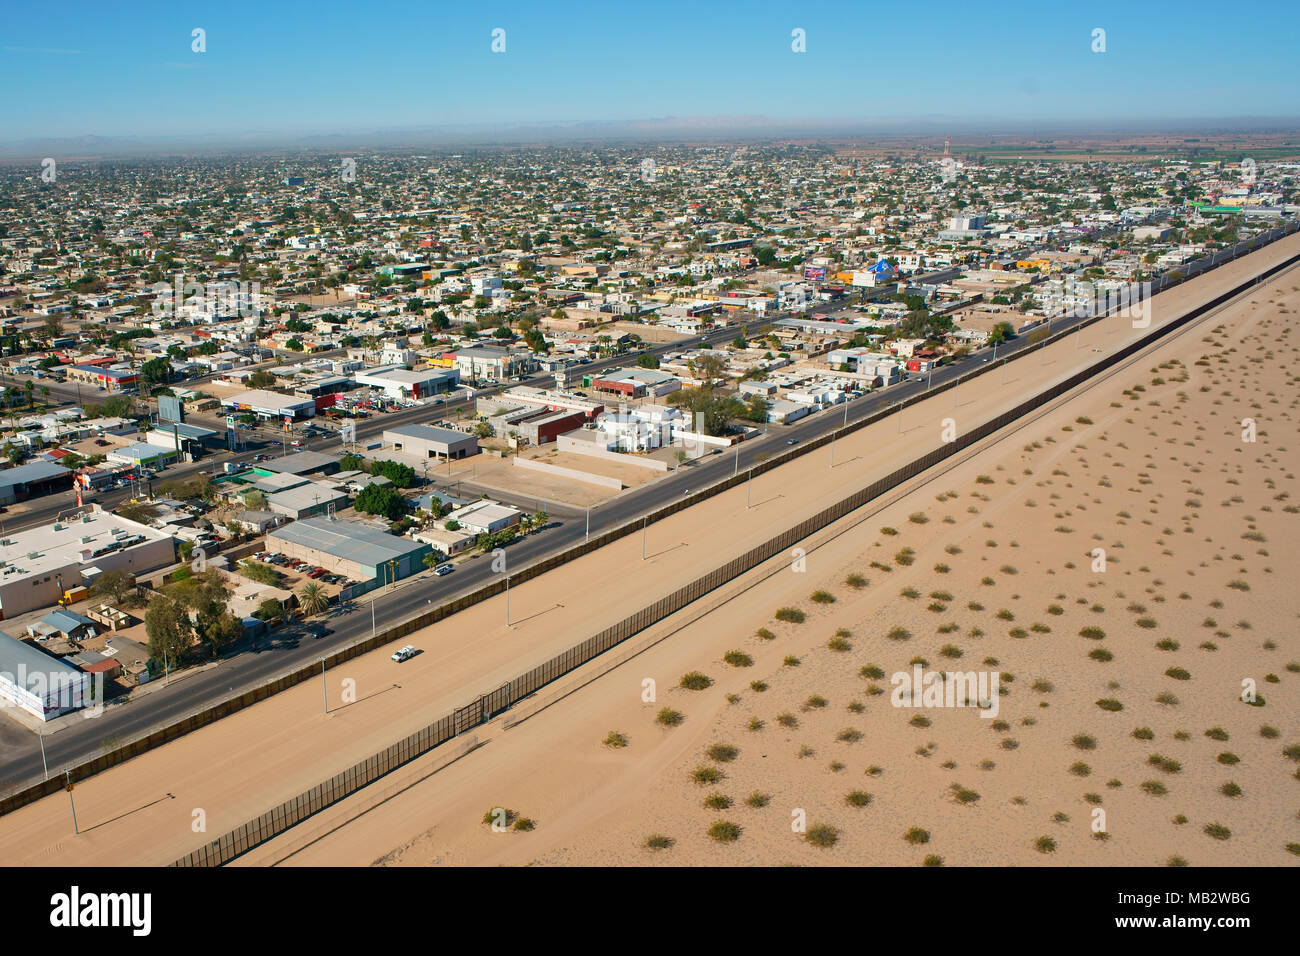 AERIAL VIEW. International border between Mexico and the United States. City of San Luis Rio Colorado in Sonora, stretching alongside the U.S. Border. Stock Photo